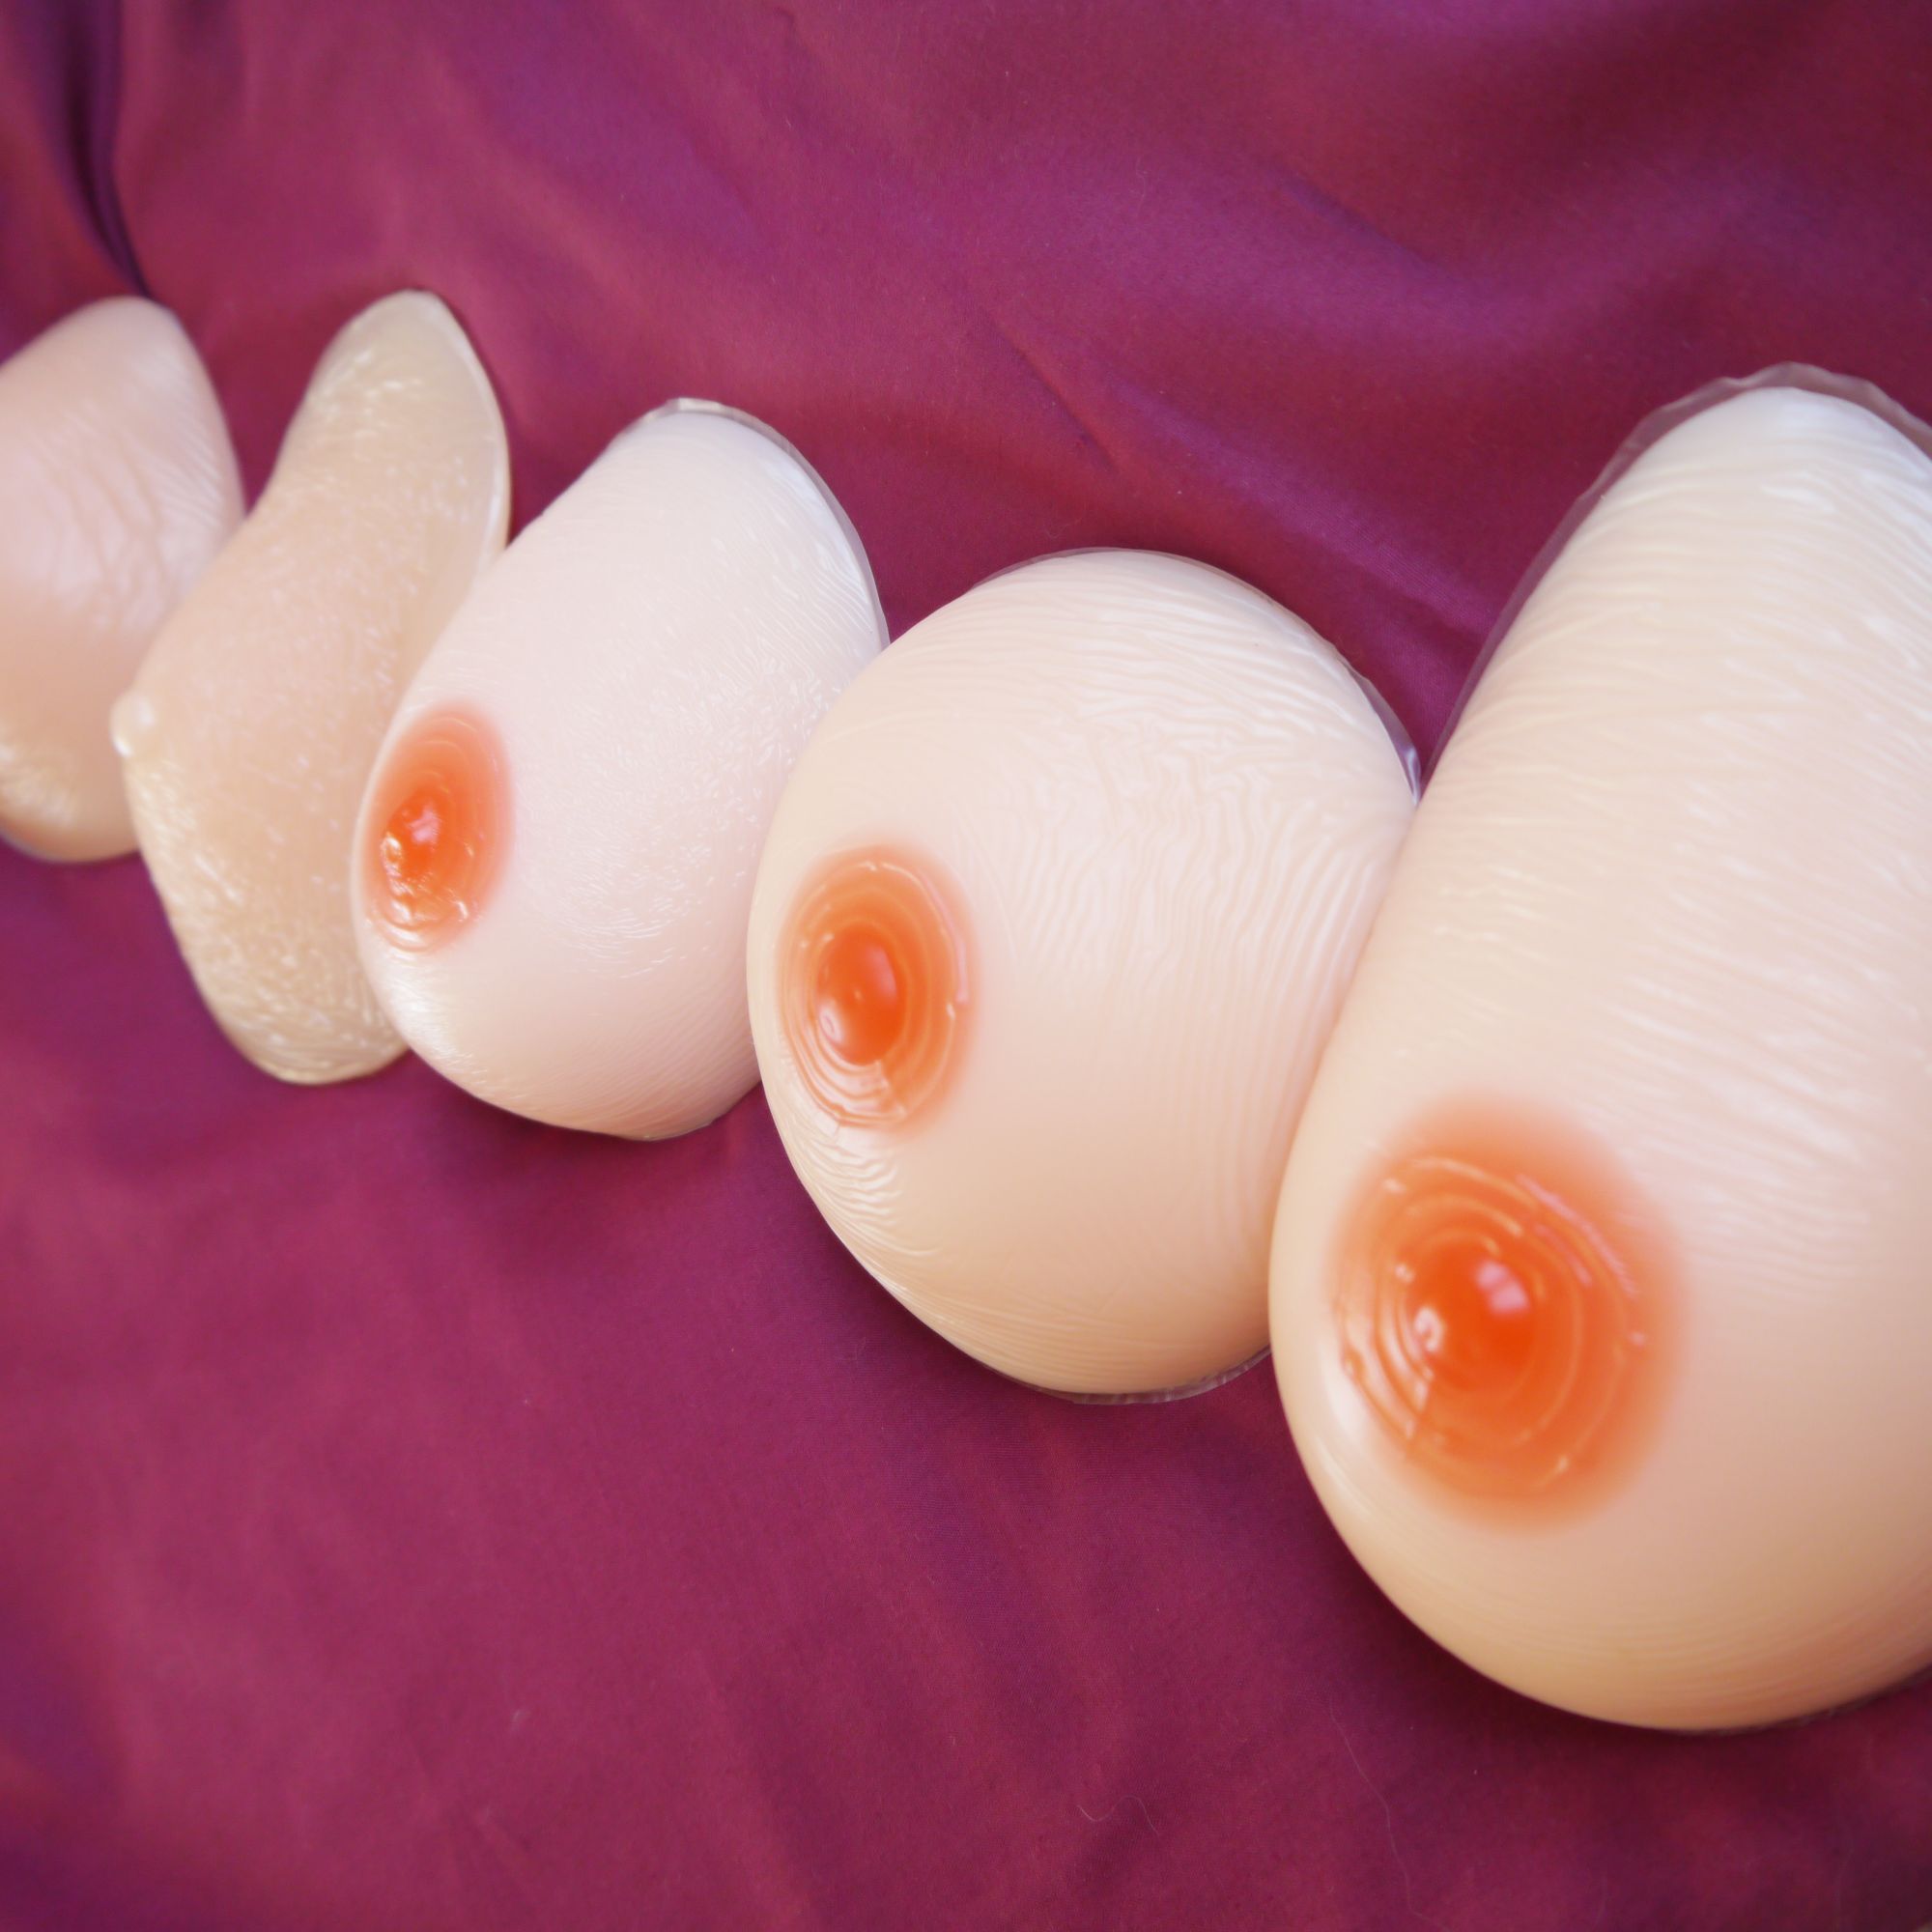 Full breast forms